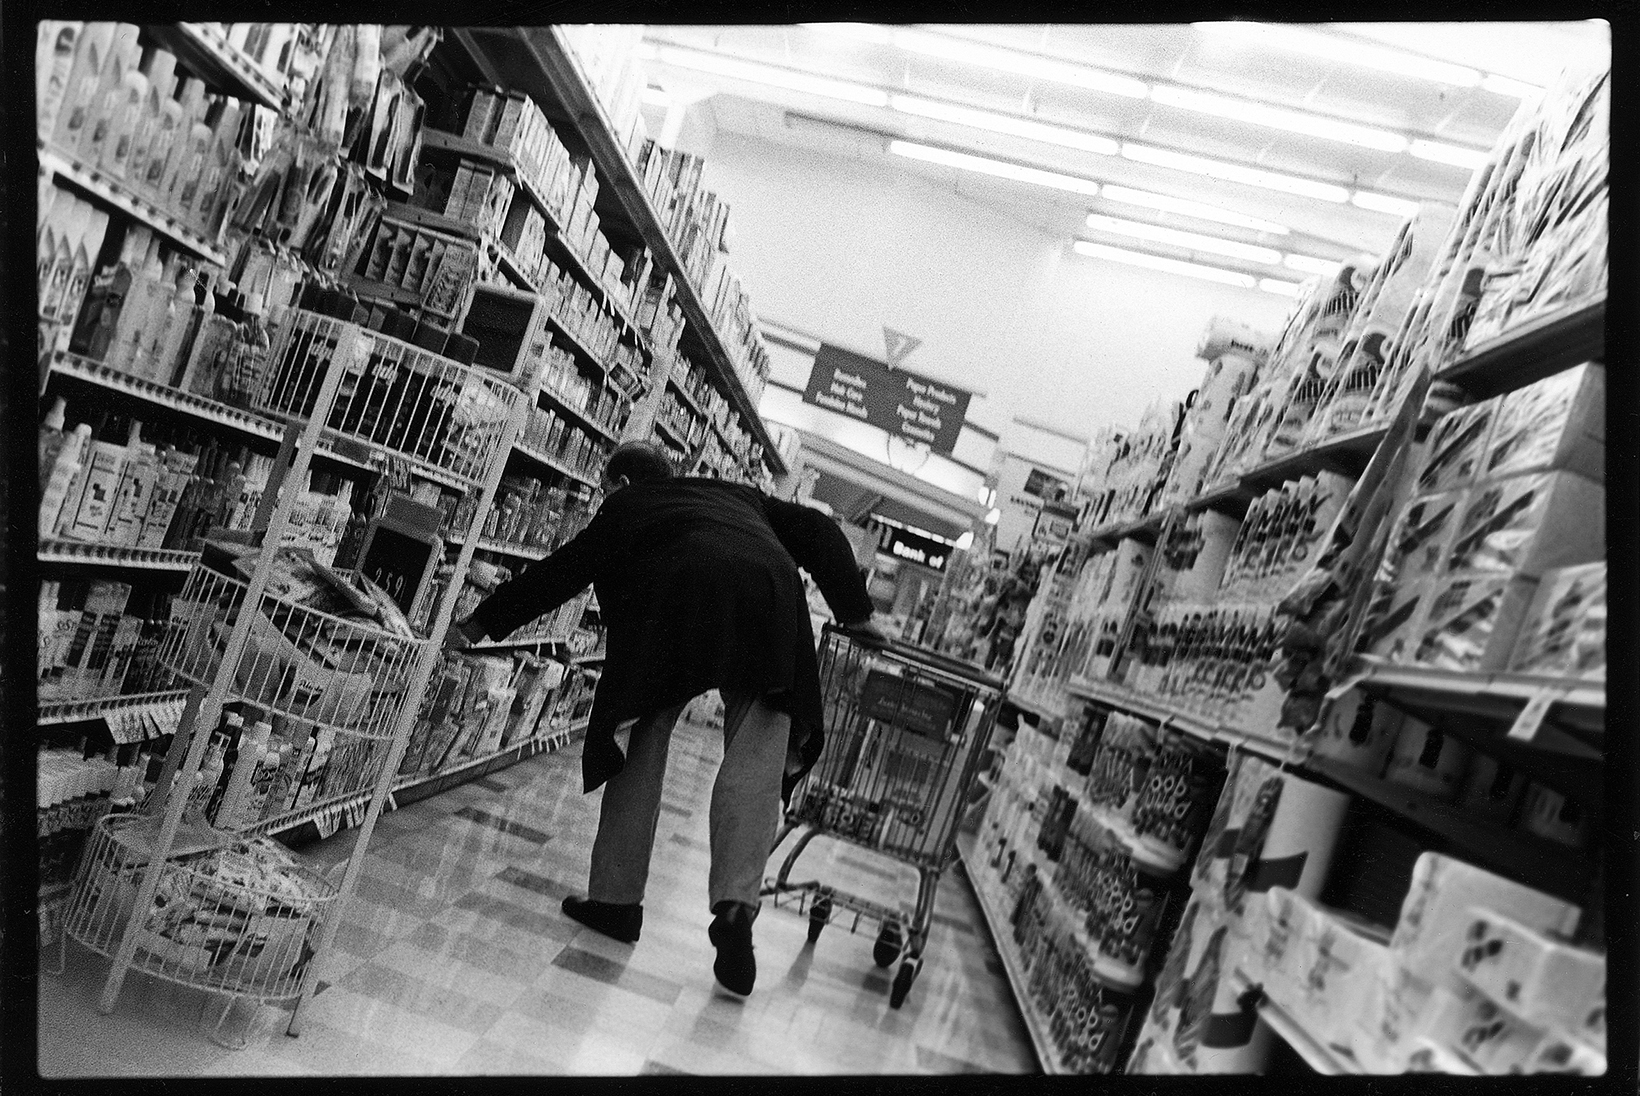 Lost In The Supermarket